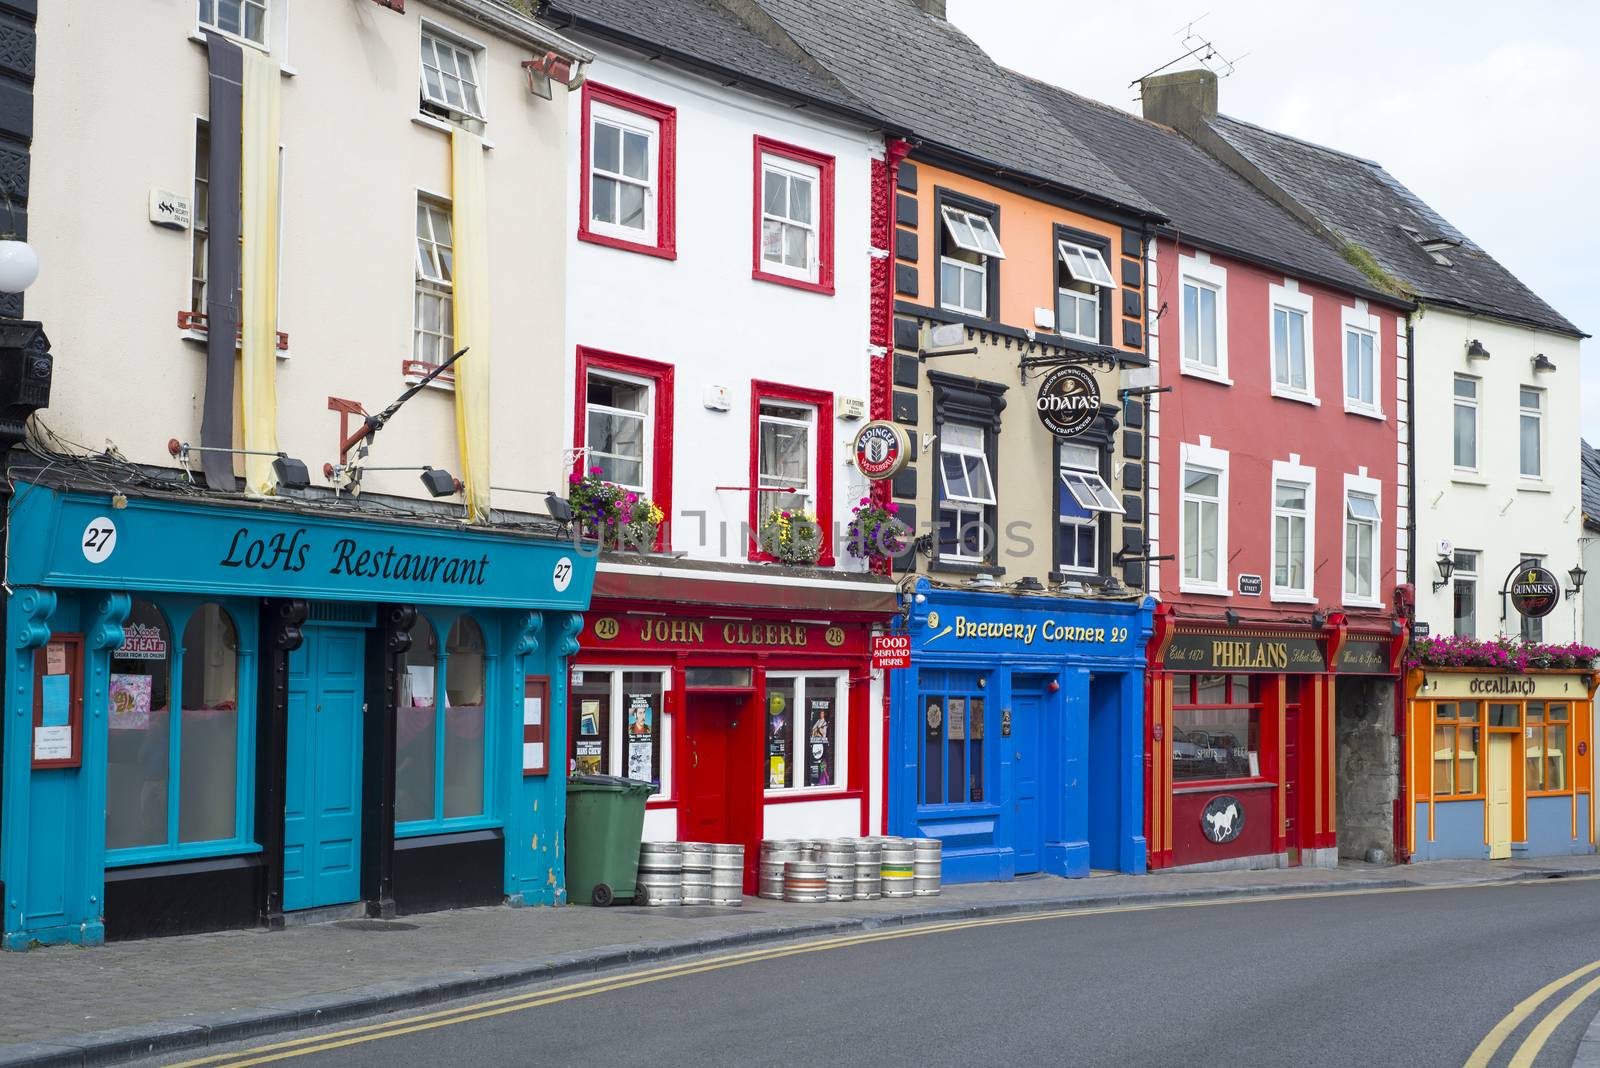 pubs and retaurant fronts in ireland by morrbyte